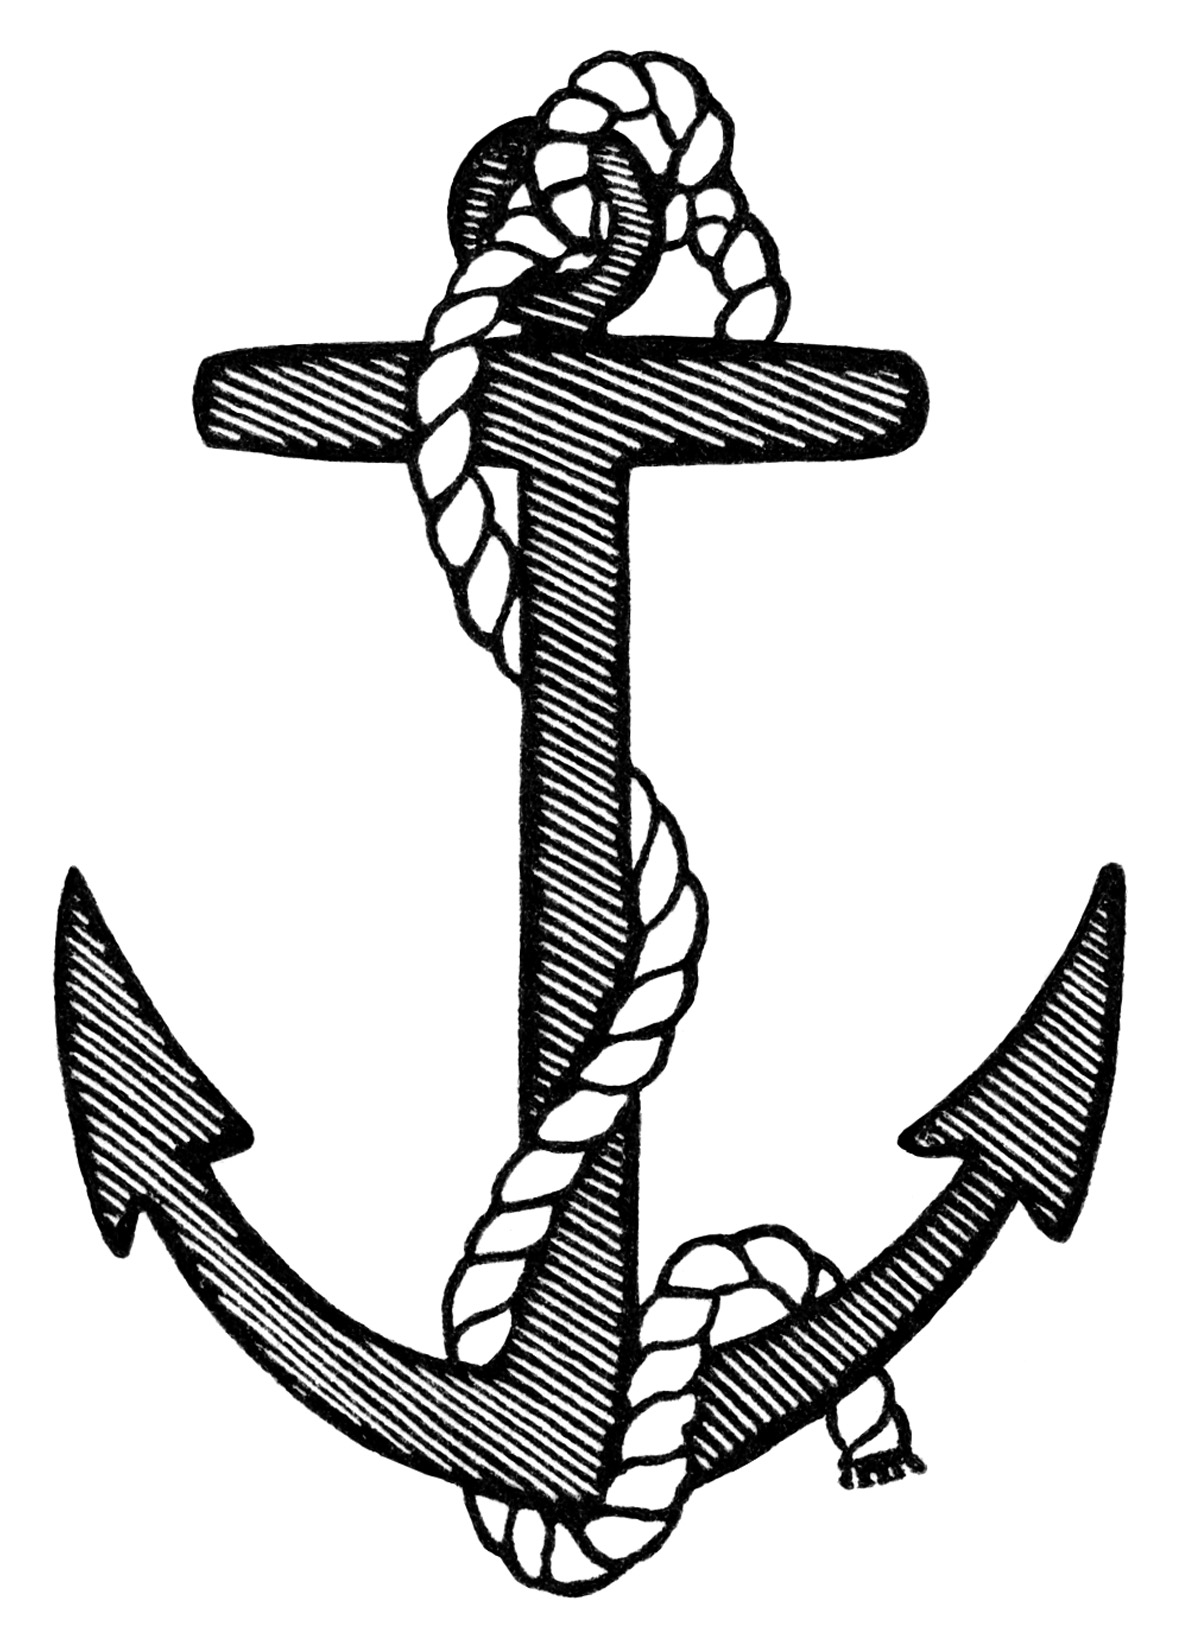 Crossed Anchors Clipart - ClipArt Best